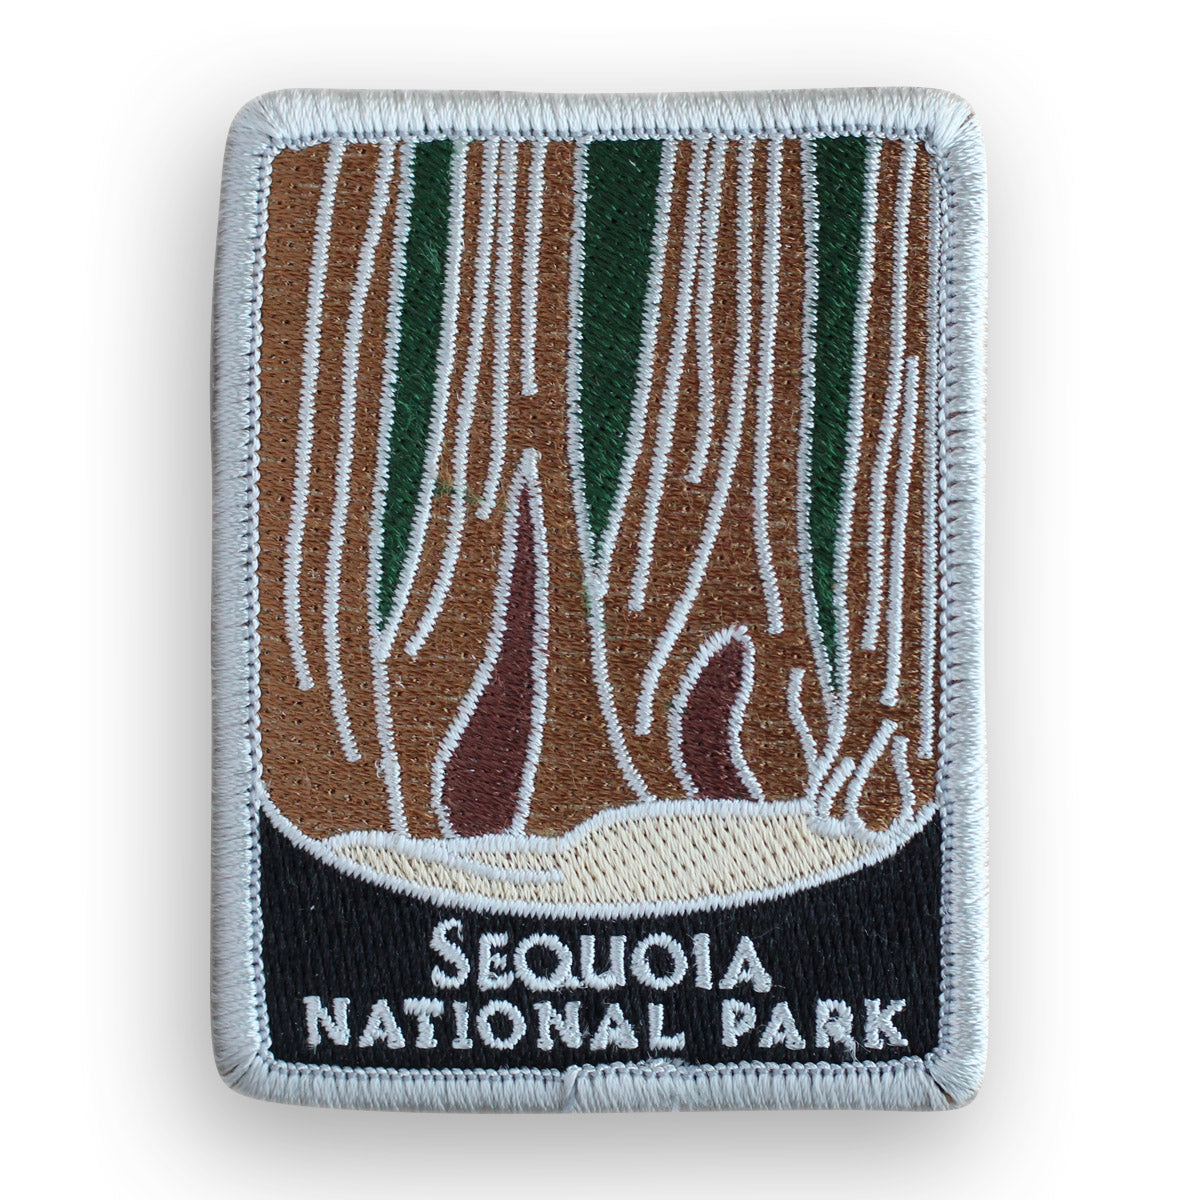 Sequoia National Park Traveler Patch